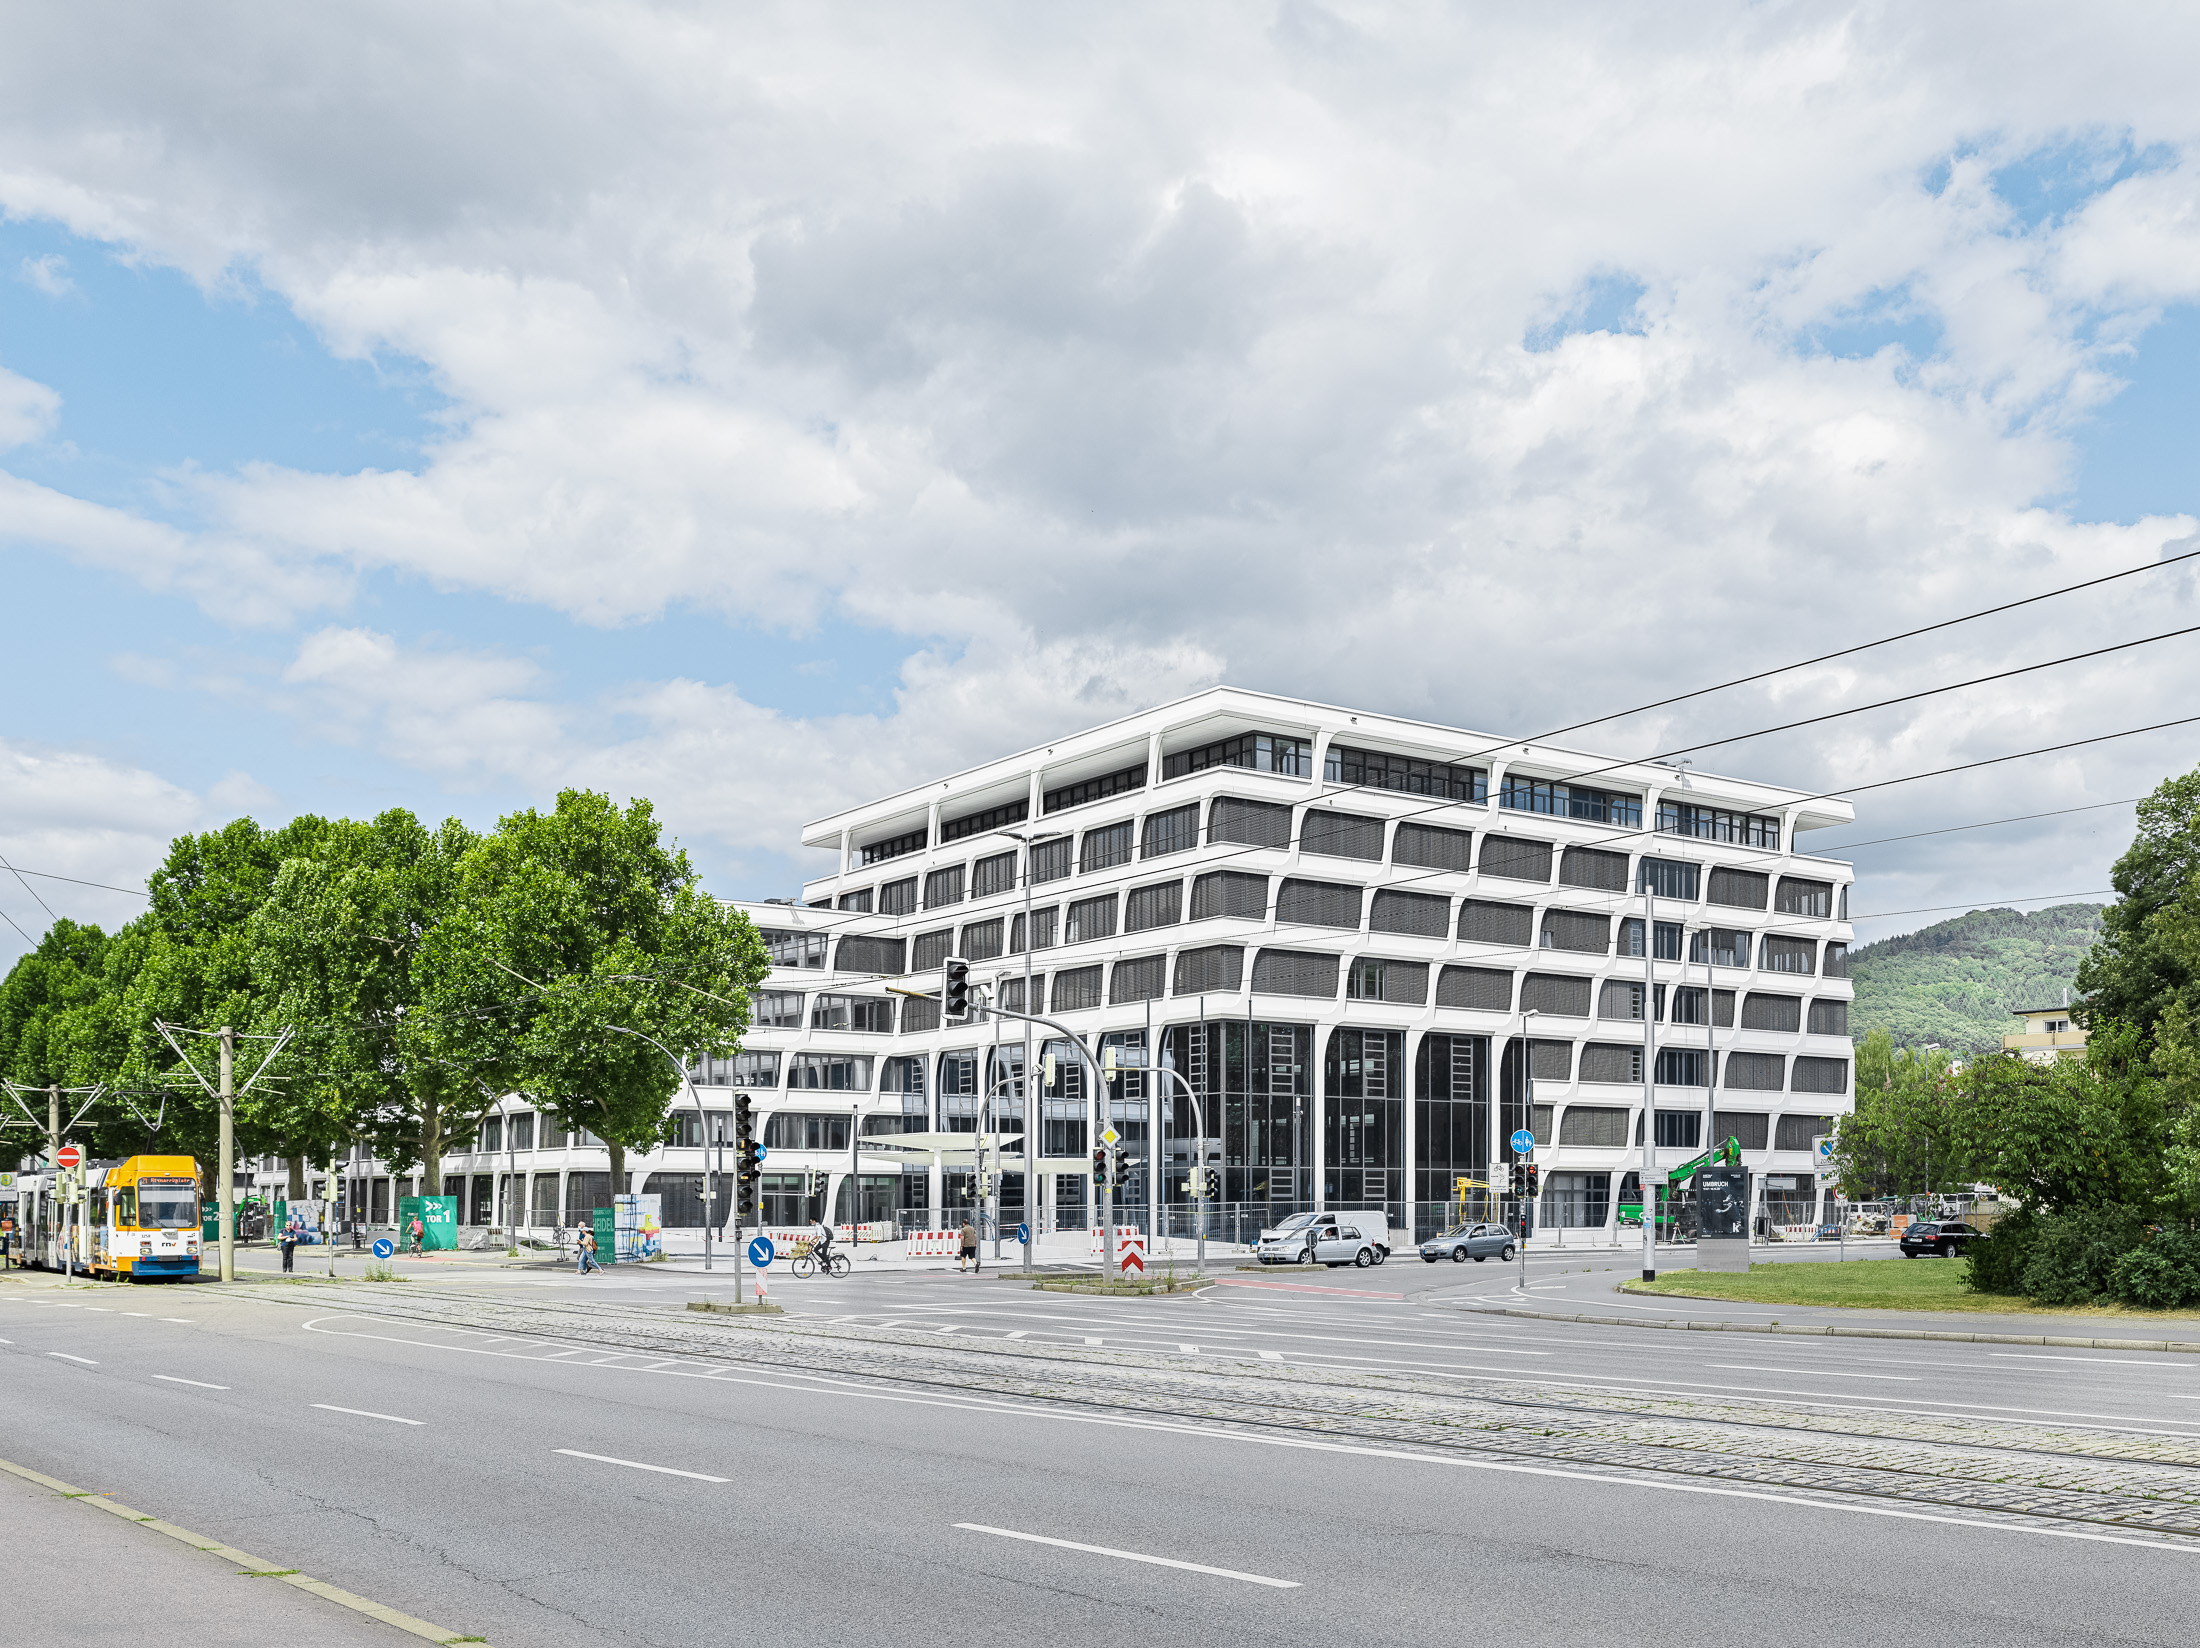 Modern office building, to the left a tram and trees, hills in the background